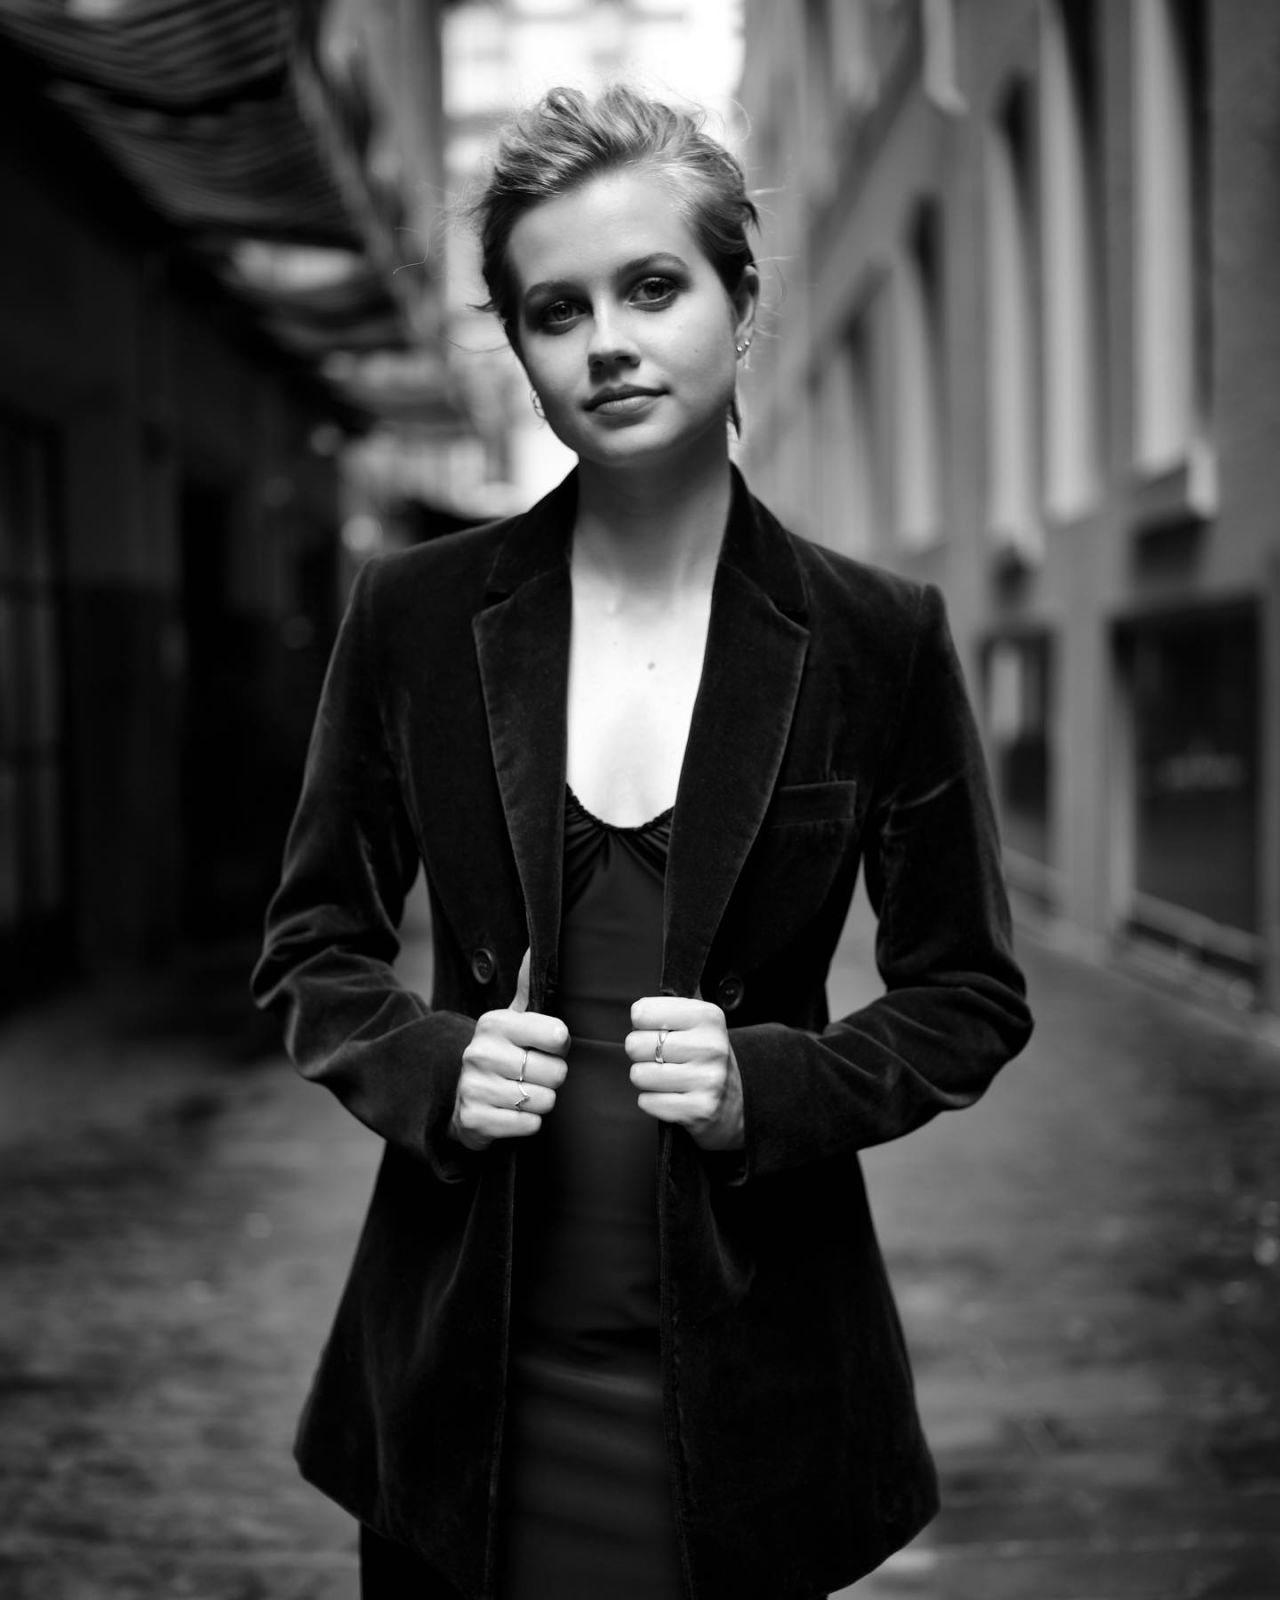 Angourie Rice - Photoshoot for iMute Magazine April 2021.